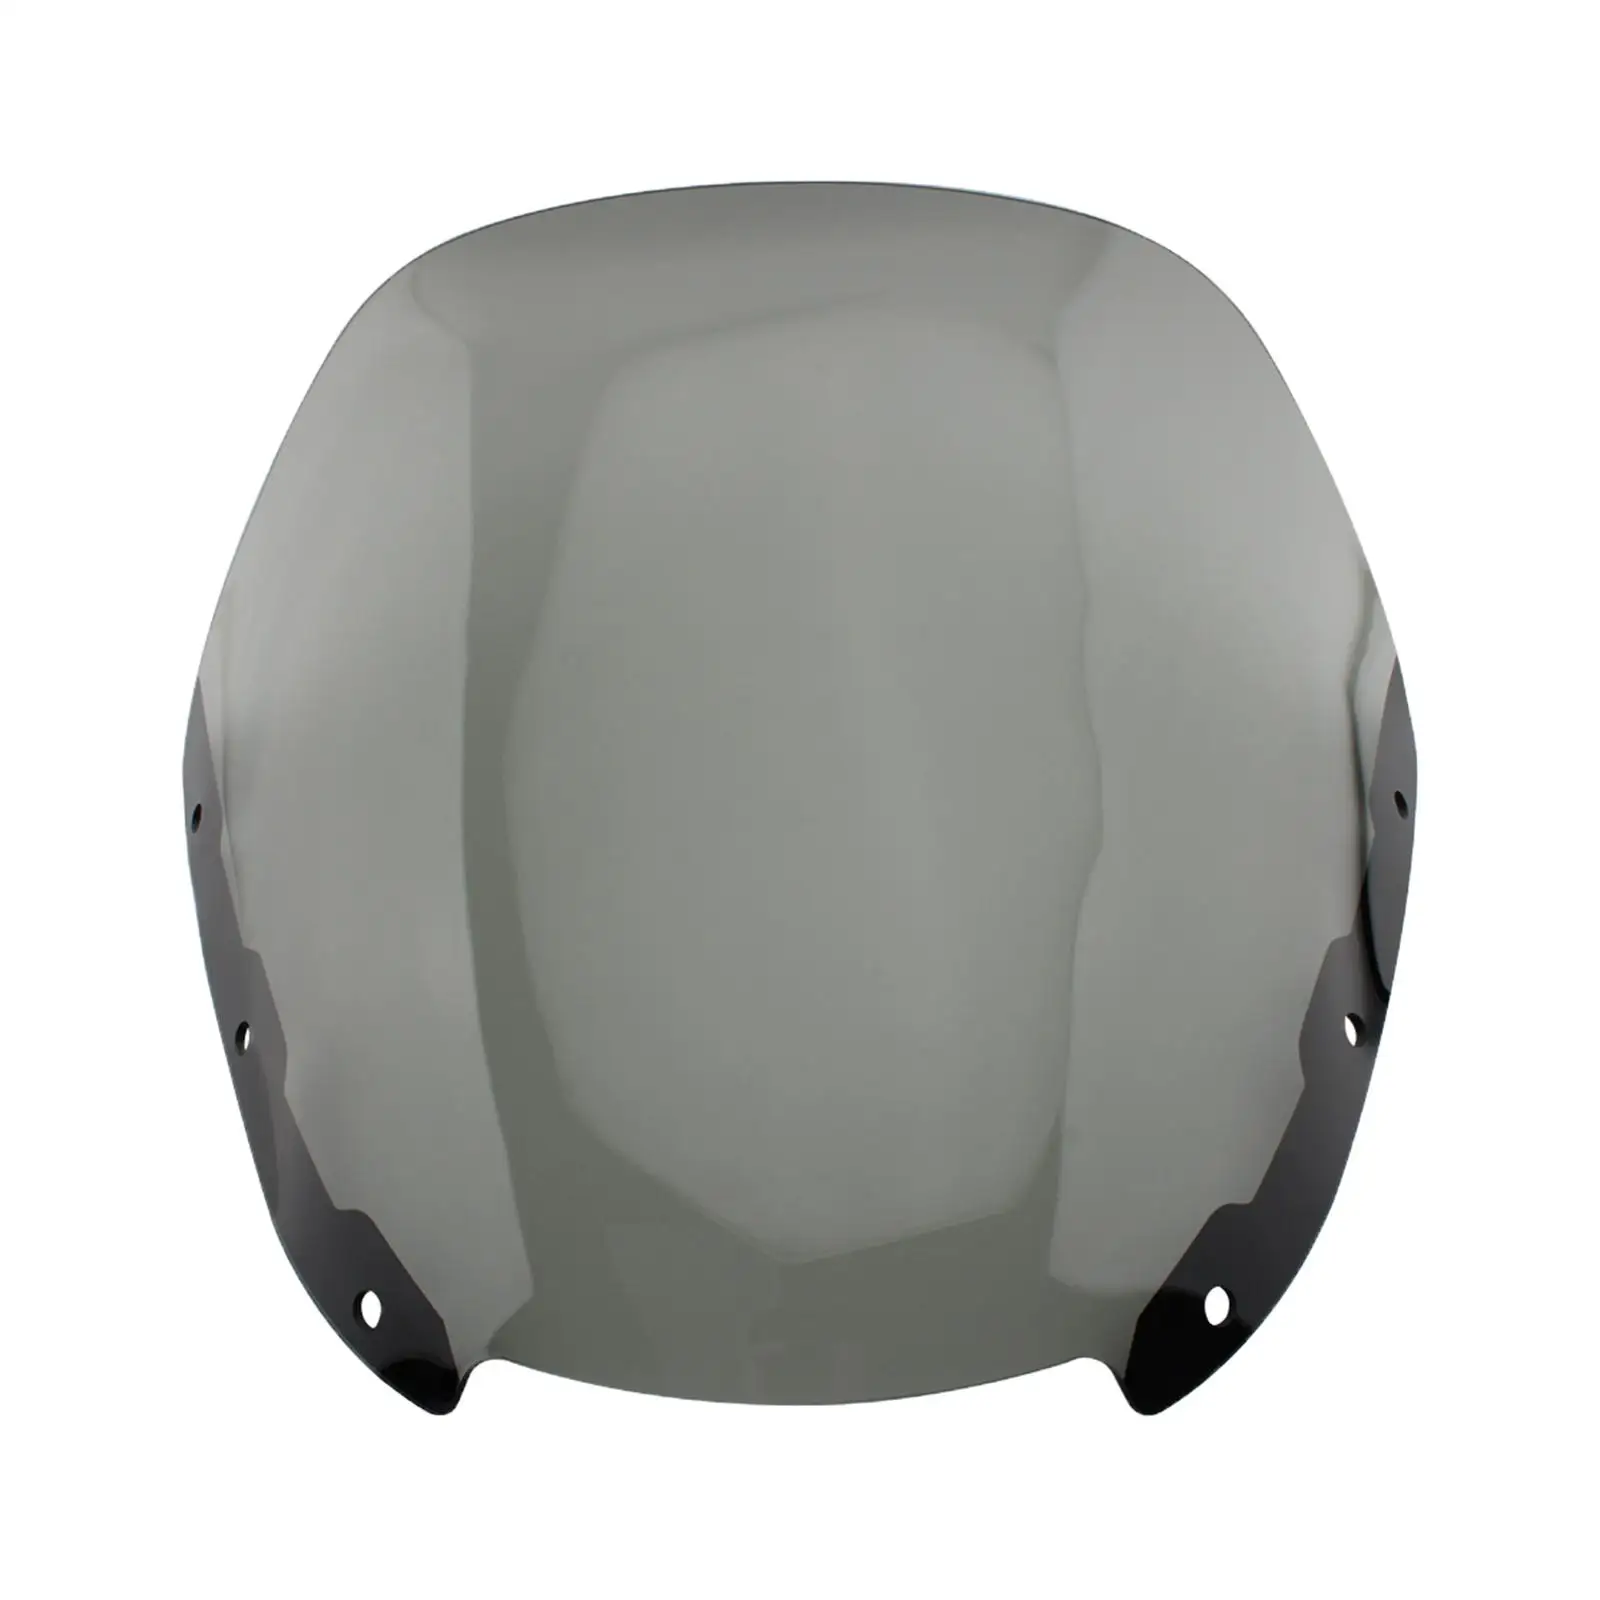 Motorcycle Windshield for R18B Bagger Transcontinental Replacement Accessory Sturdy Professional